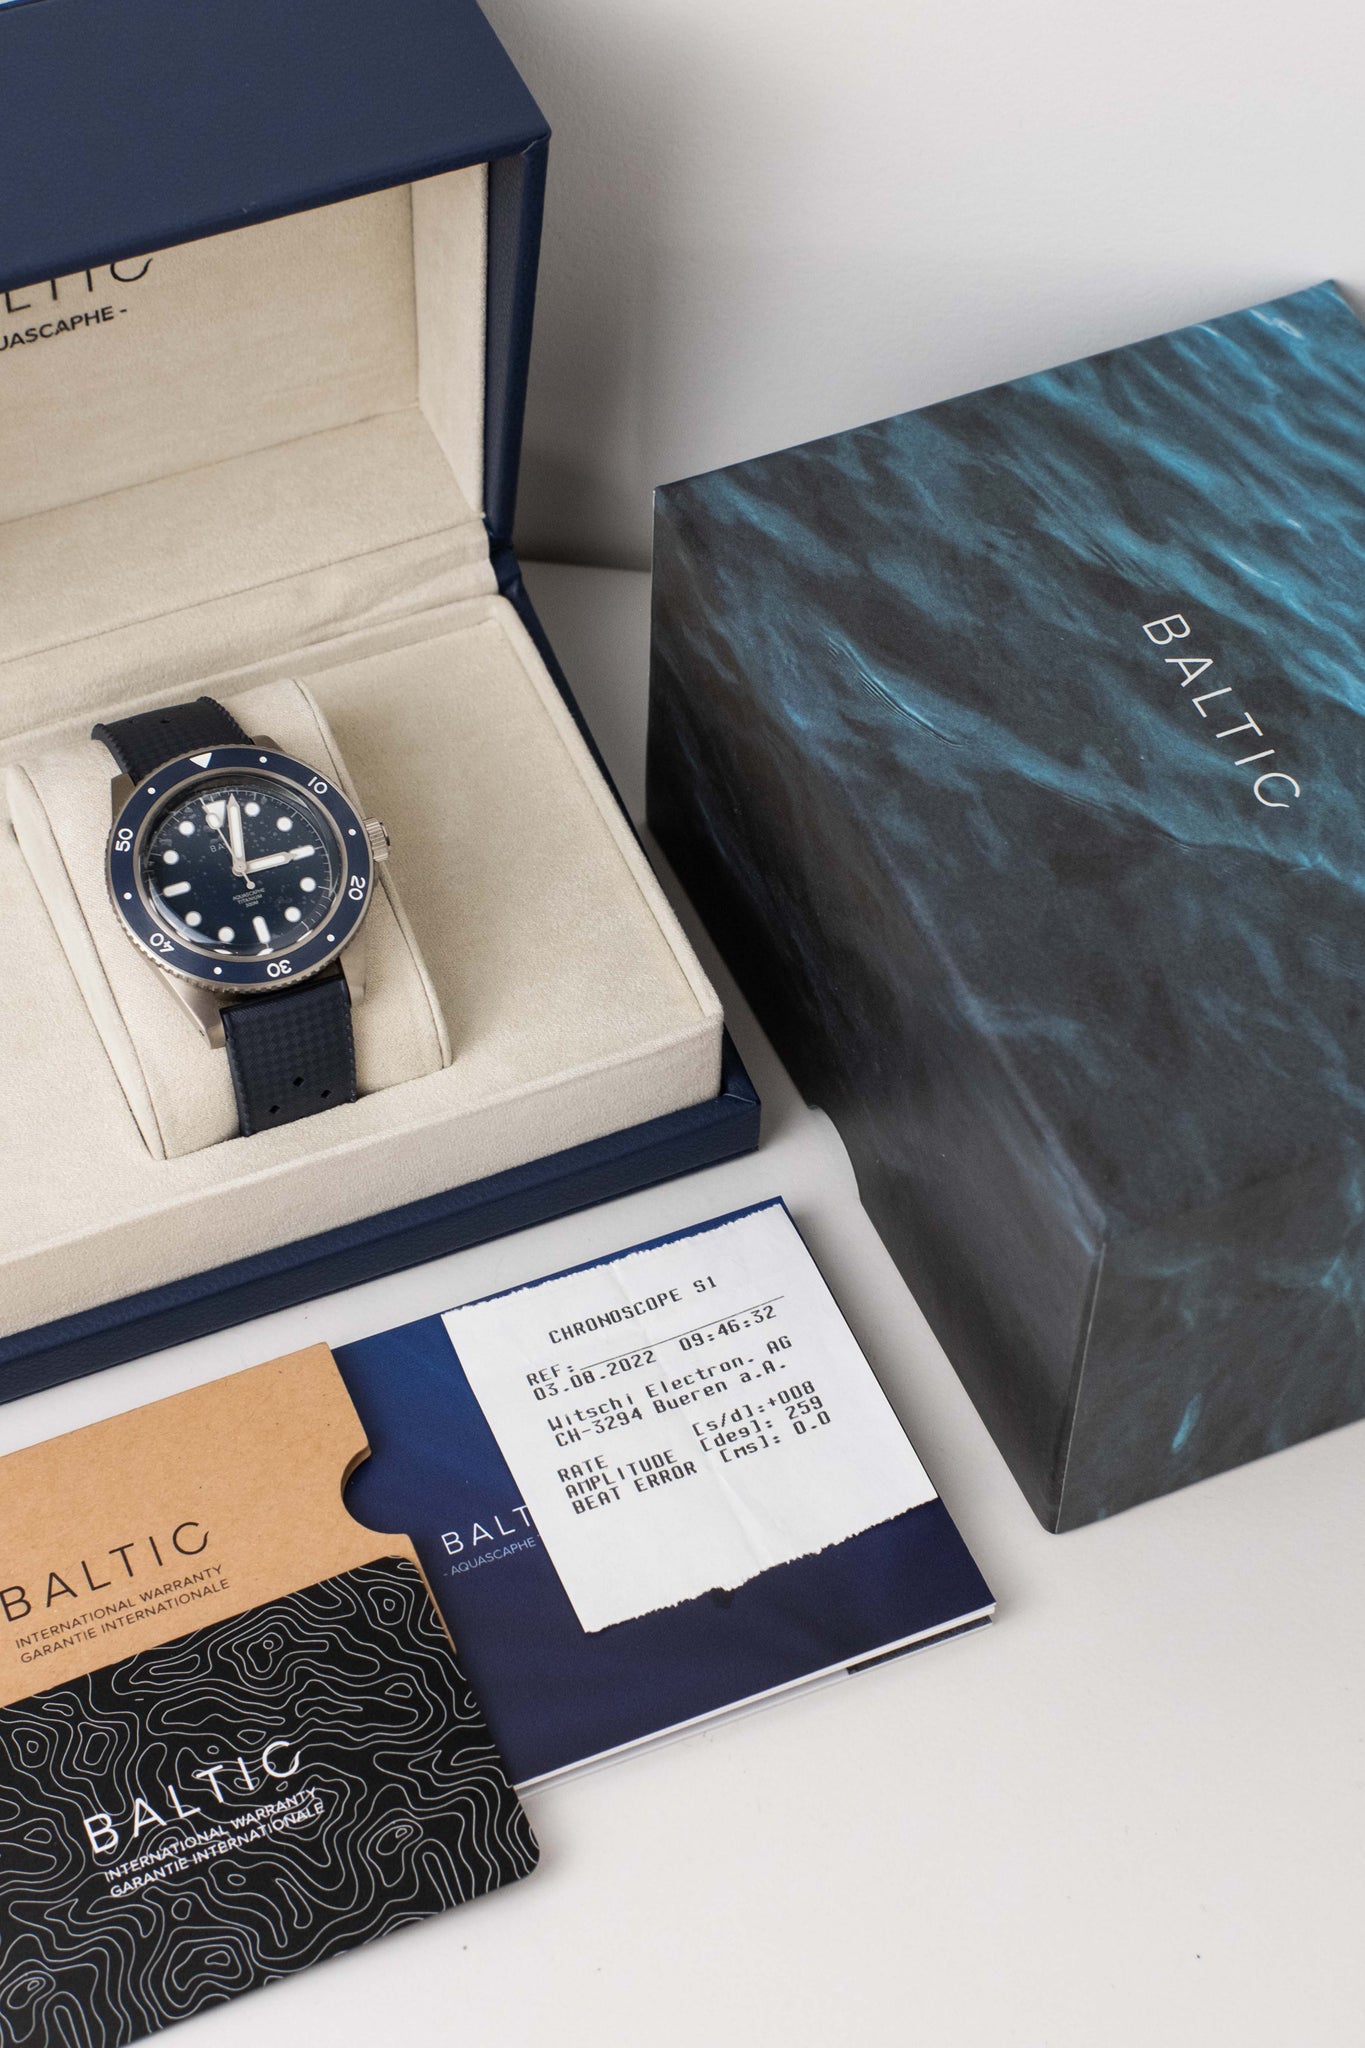 Baltic Aquascaphe Titanium Blue 2022 w/ Box & Papers (Brand New) Box and Papers Photo